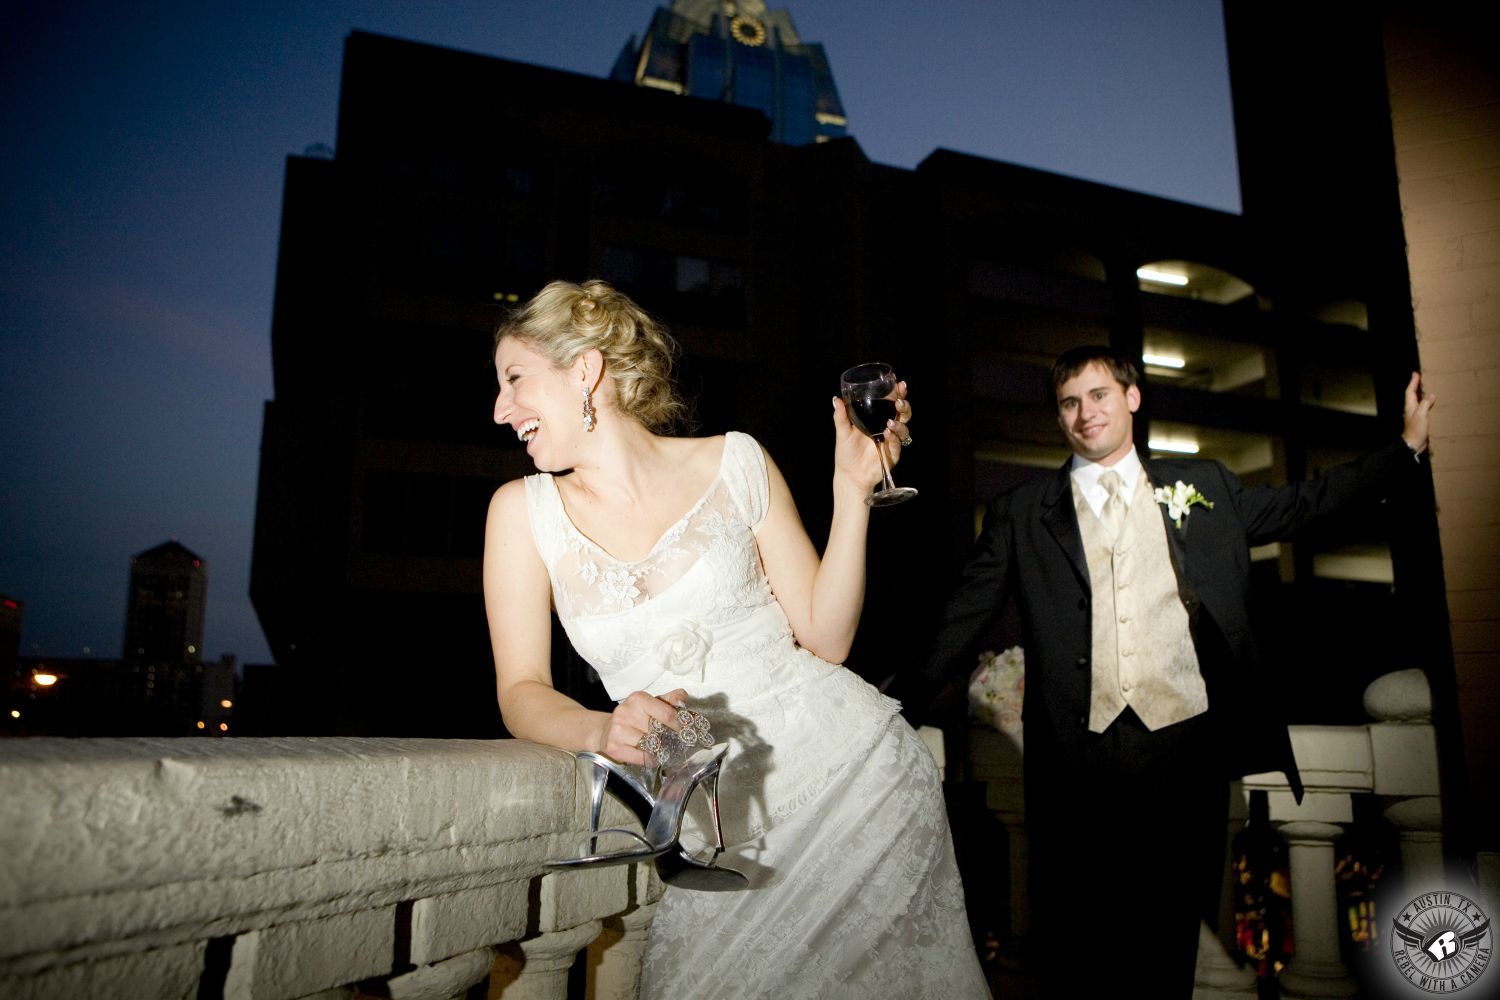 Happy blonde bride with makeup by Rhea McCarter Craft hold glass of red wine and her silver high heels with groom in black tuxedo and white vest and tie behind her on the balcony of the Driskill Hotel with the Frost Building in the background in downtown Austin on ther wedding day.